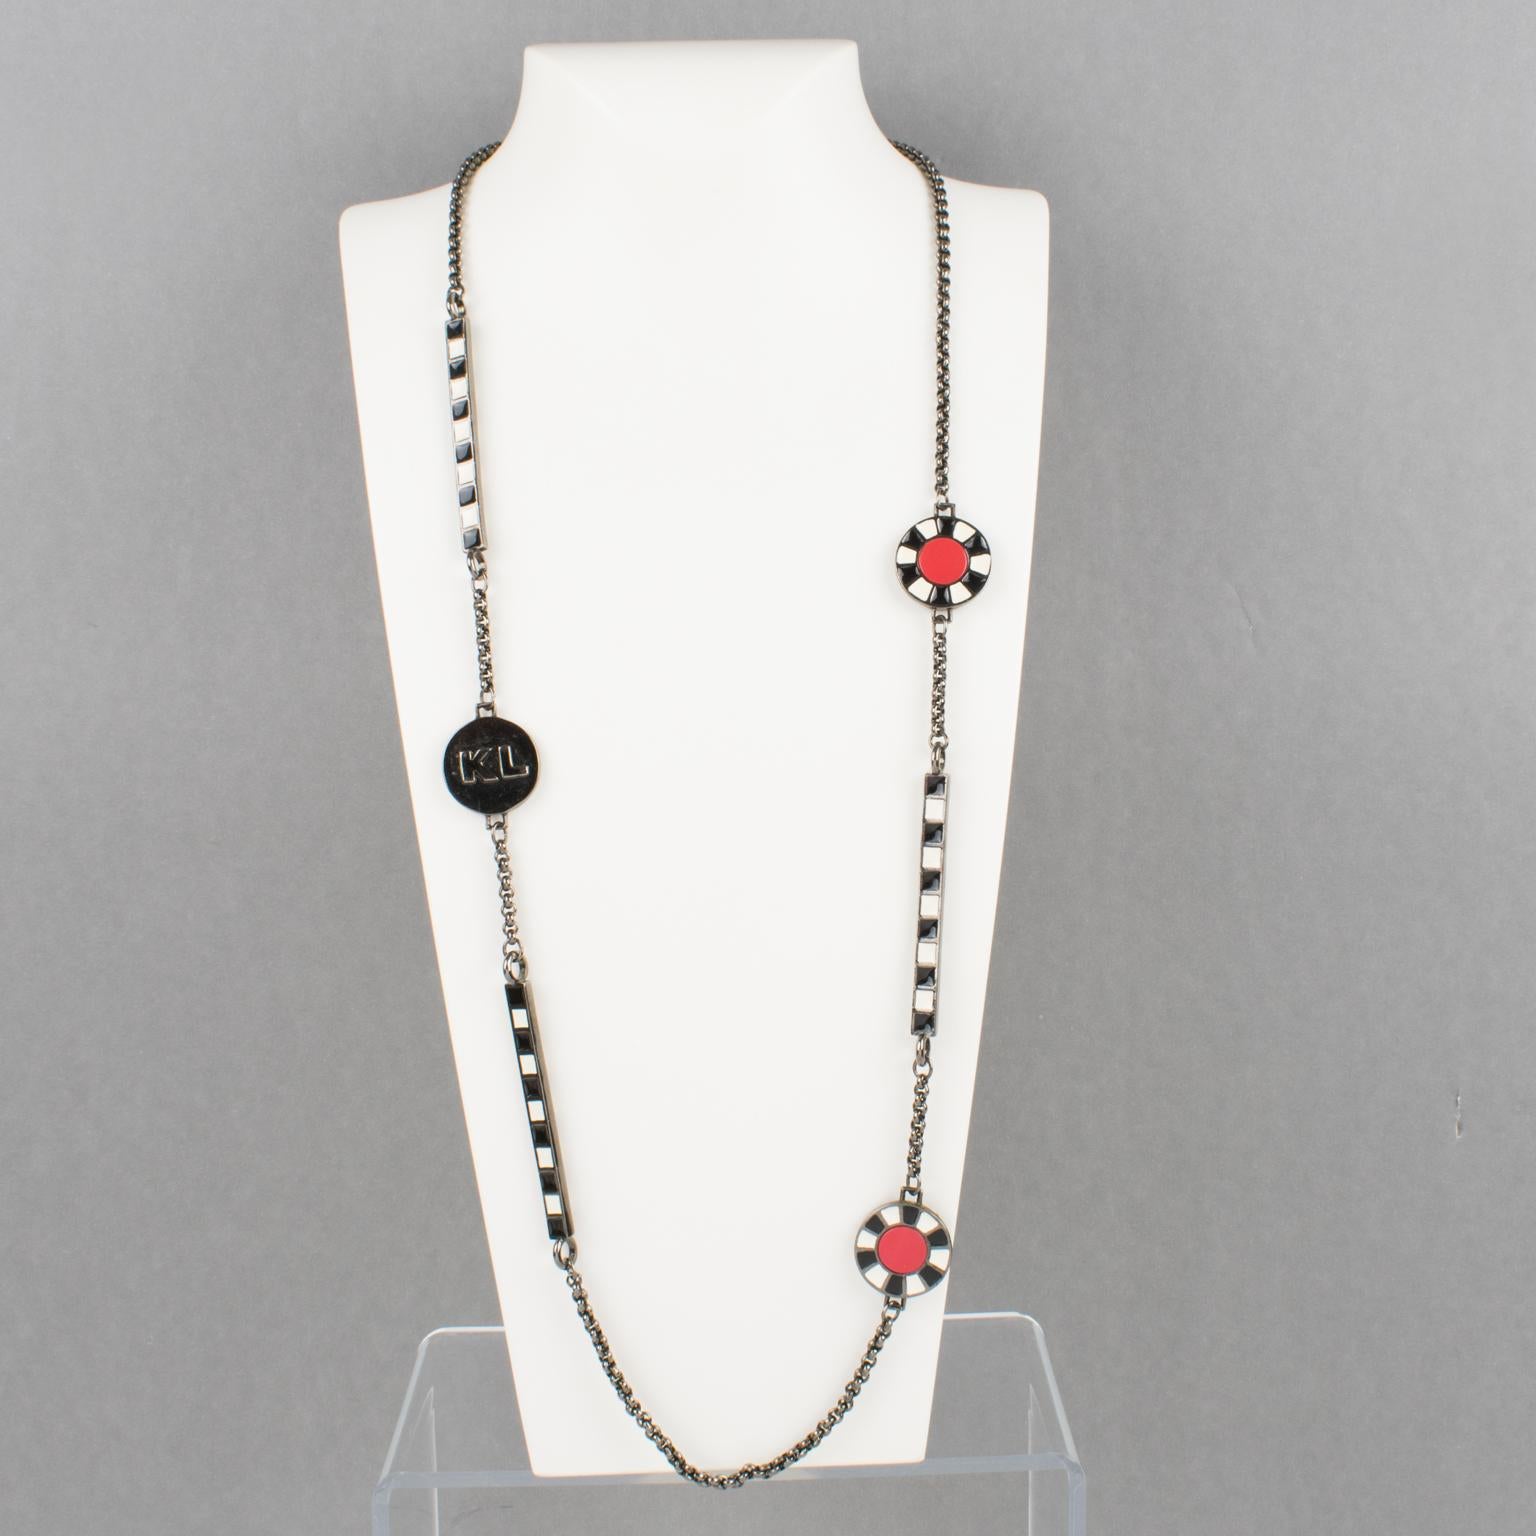 Modernist Karl Lagerfeld Gunmetal Long Necklace with Red and Black Enamel For Sale